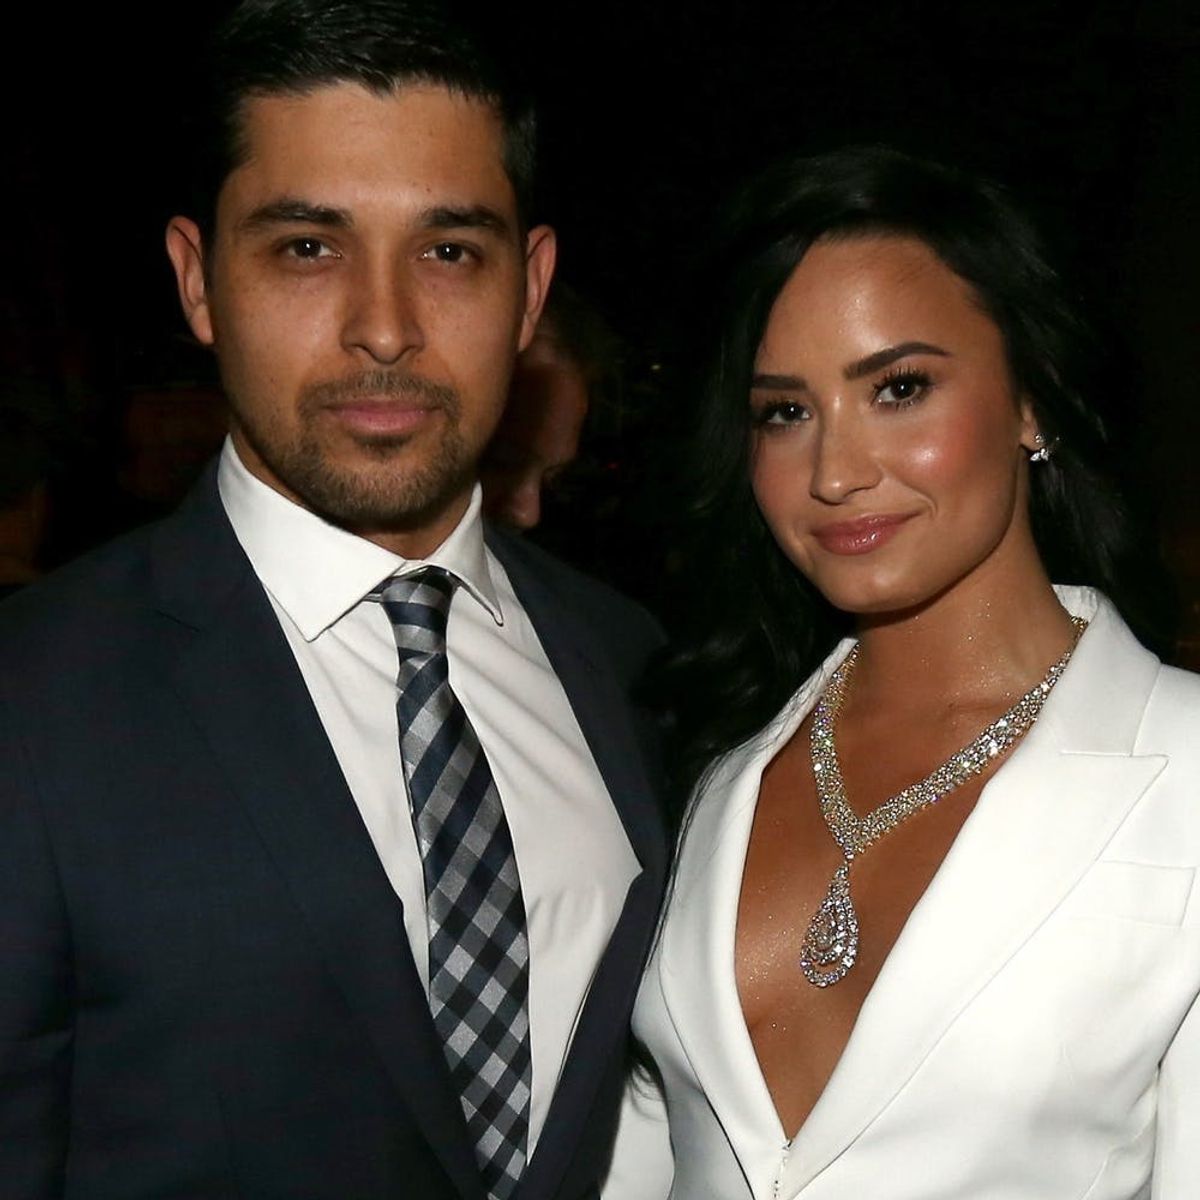 Demi Lovato and Wilmer Valderrama Just Reunited and Our Hearts Practically Exploded